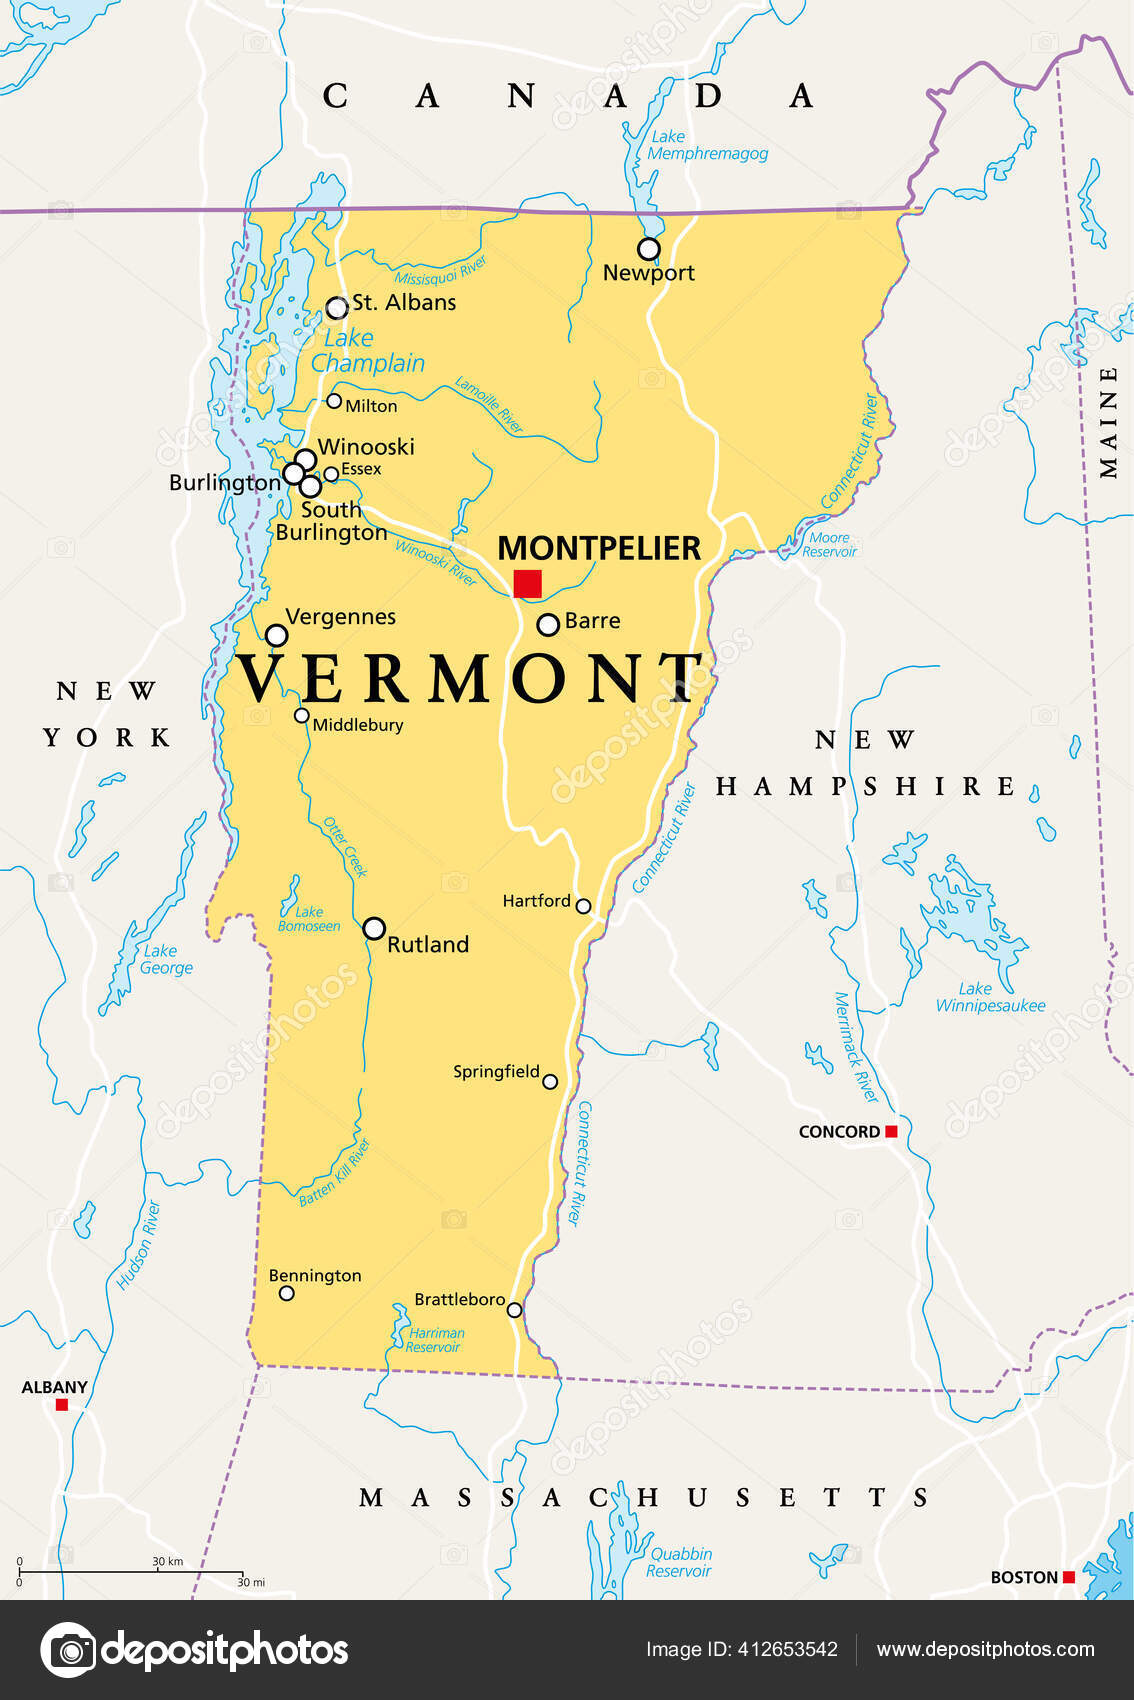 Vermont Political Map Capital Montpelier Borders Cities Rivers Lakes Northeastern Vector Image By C Furian Vector Stock